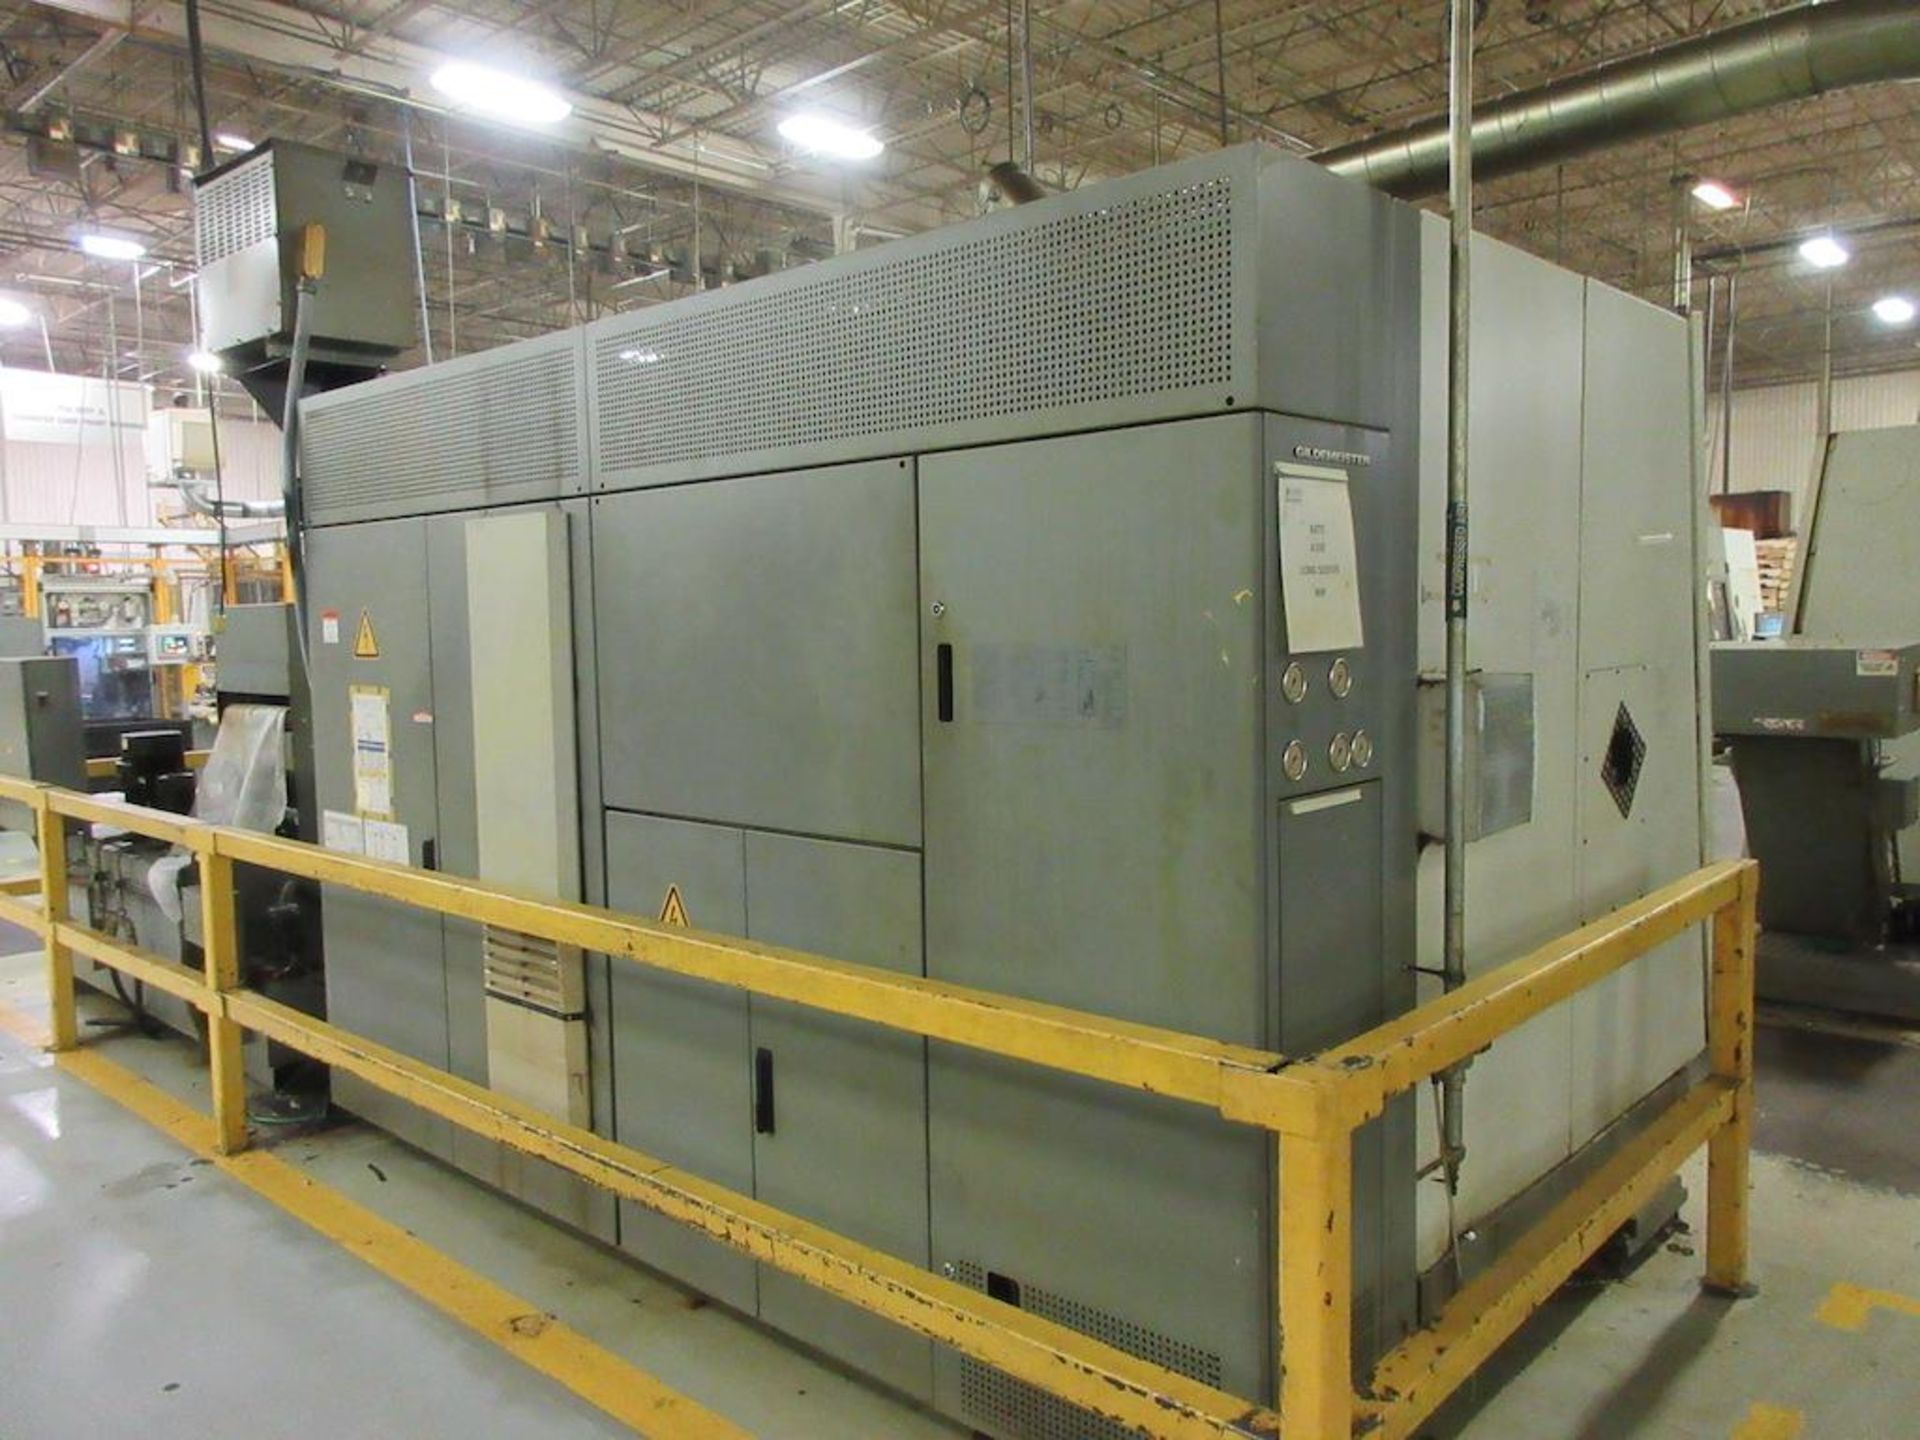 2007 DMG CNC Lathe, Model Twin 65, Twin Spindle, 4 Axis, CNC Control, B-Axis, Max. Turning - Image 11 of 16